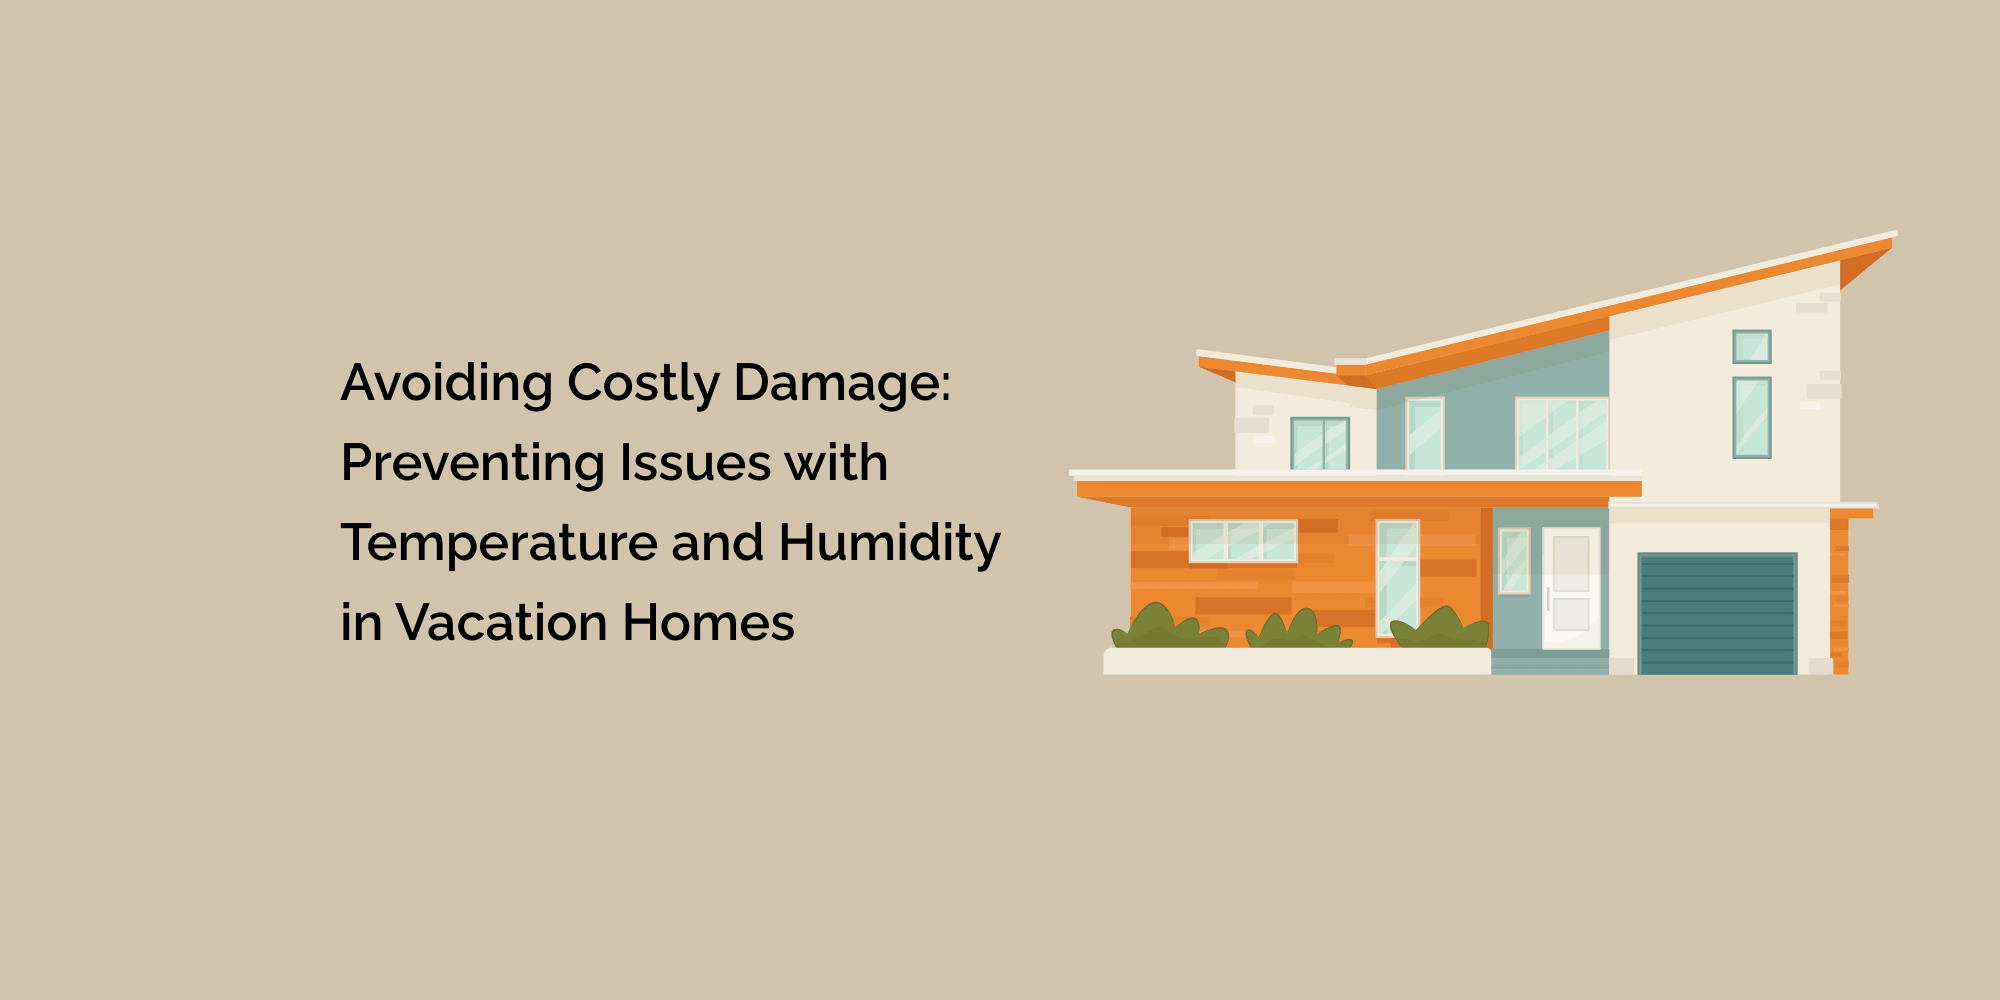 Avoiding Costly Damage: Preventing Issues with Temperature and Humidity in Vacation Homes